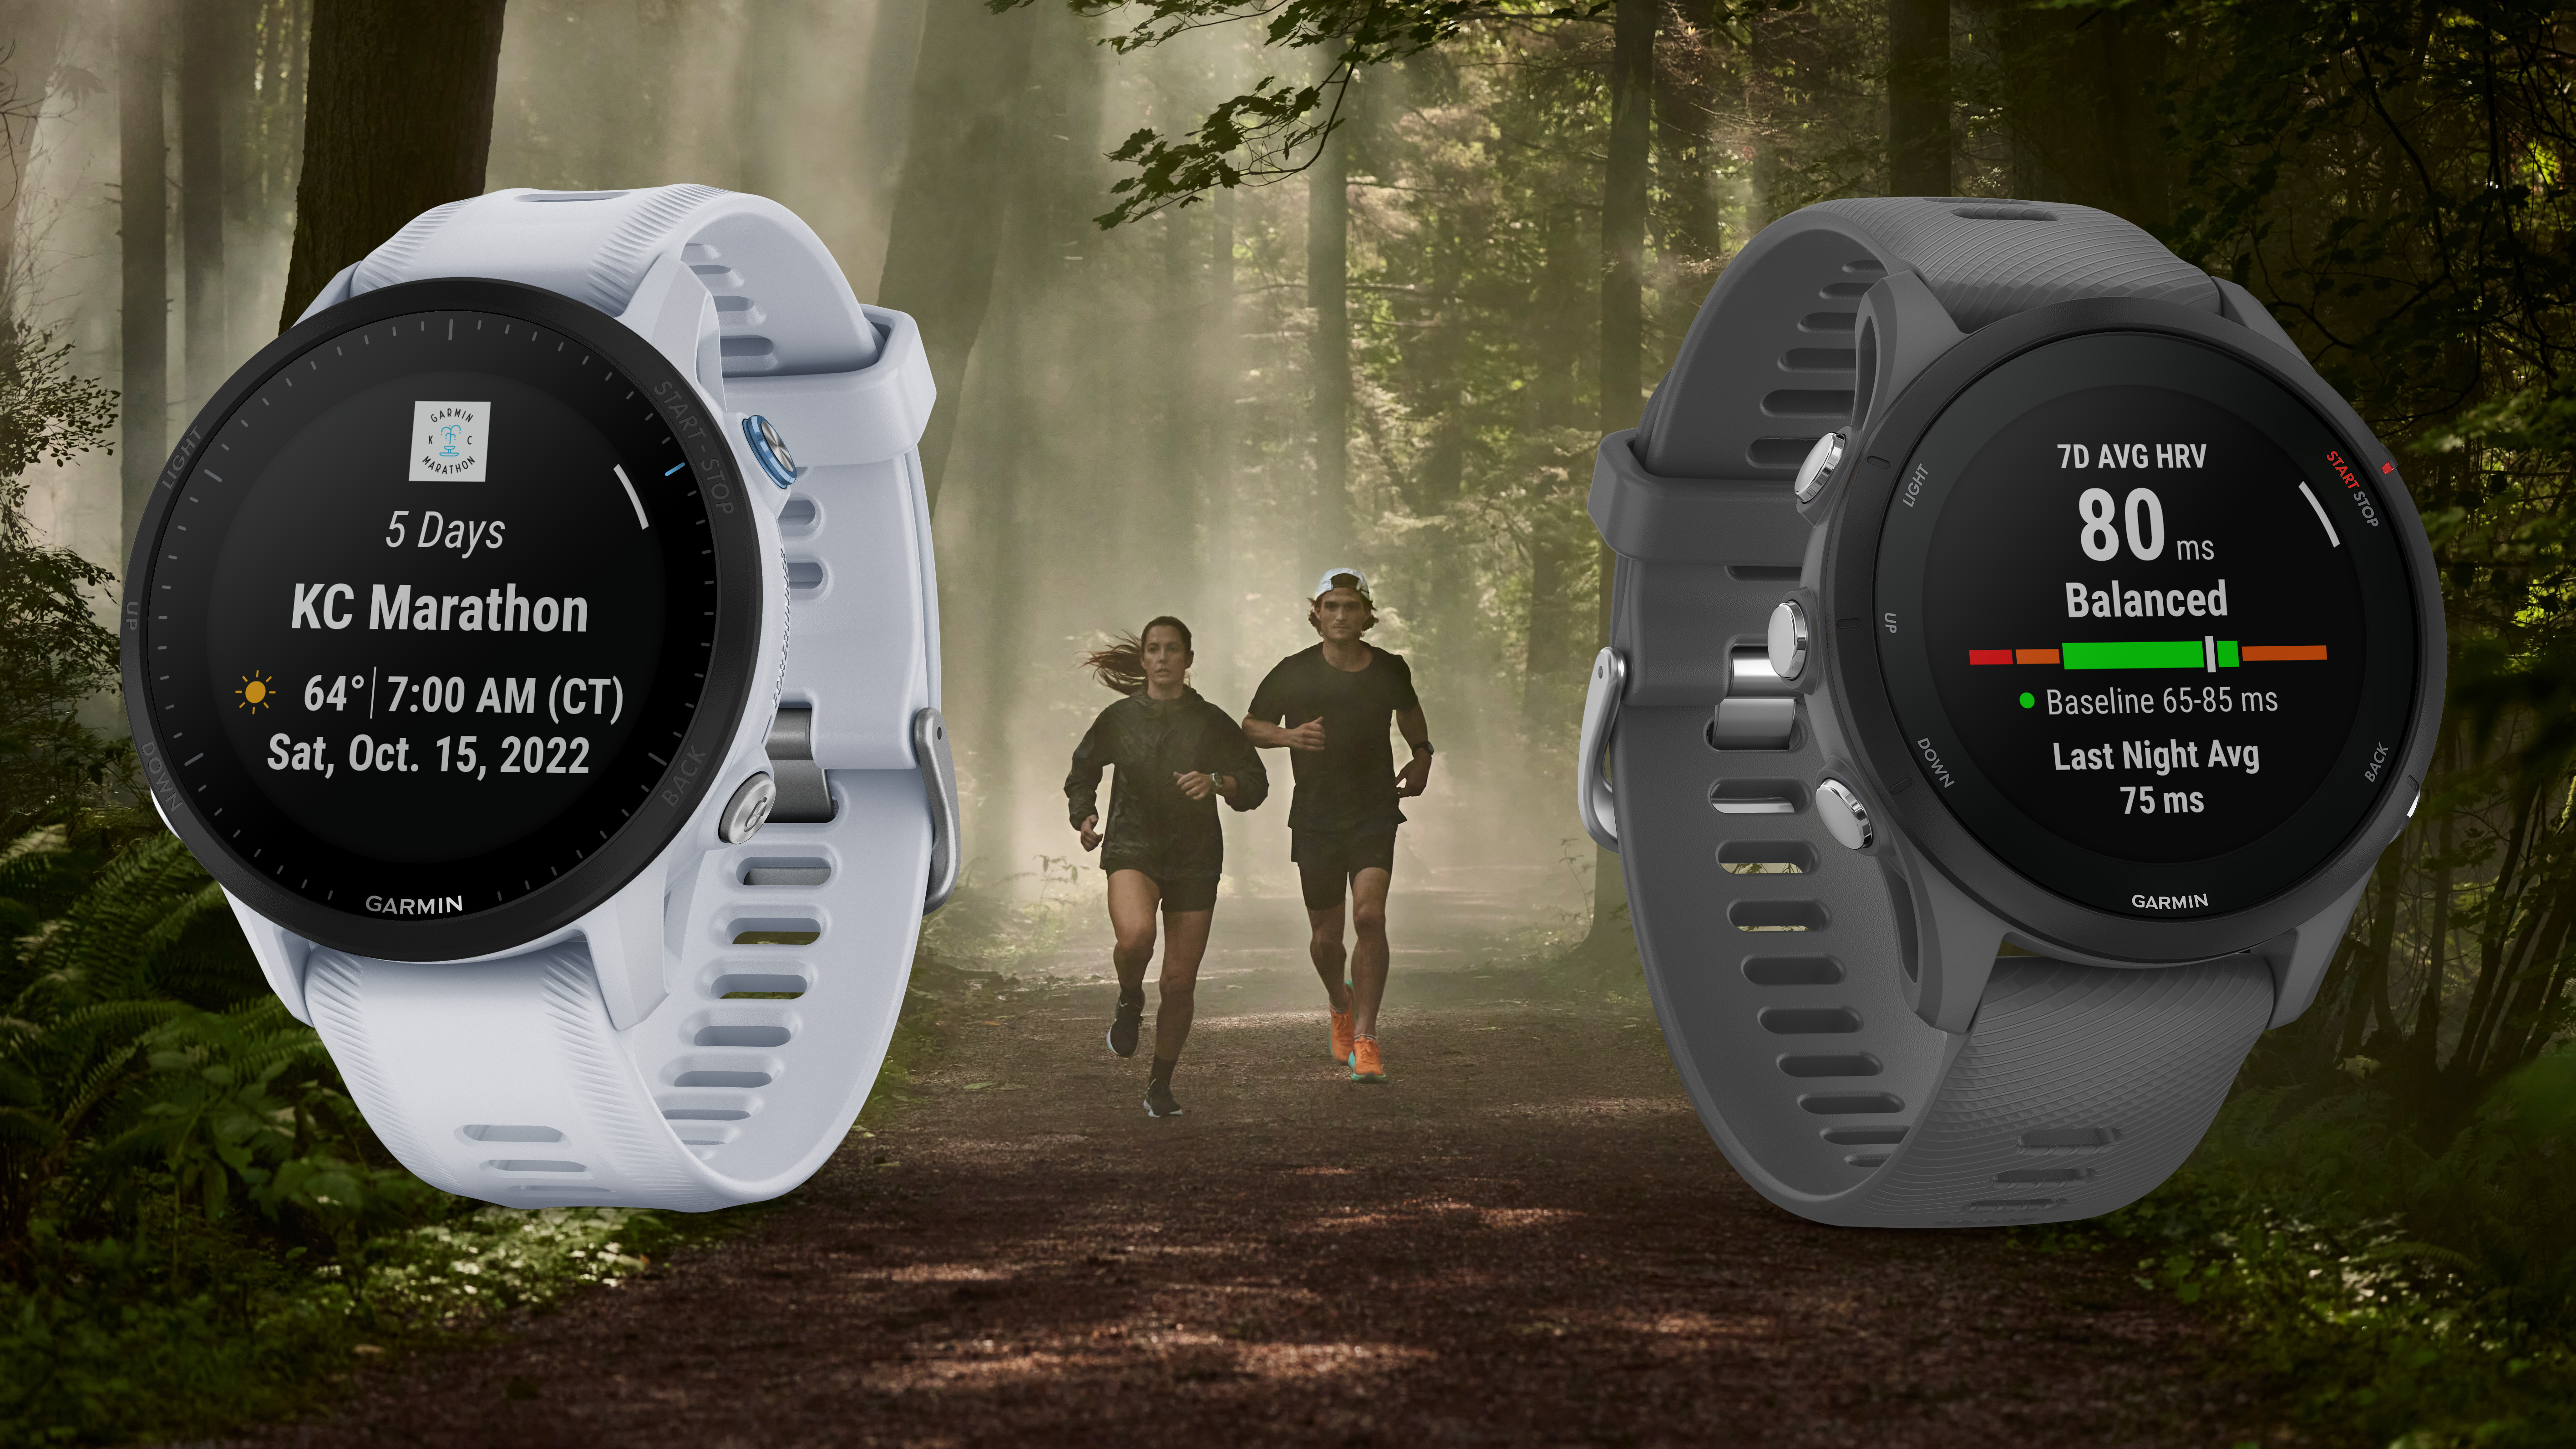 Garmin announces Forerunner 955 with solar charging and Forerunner